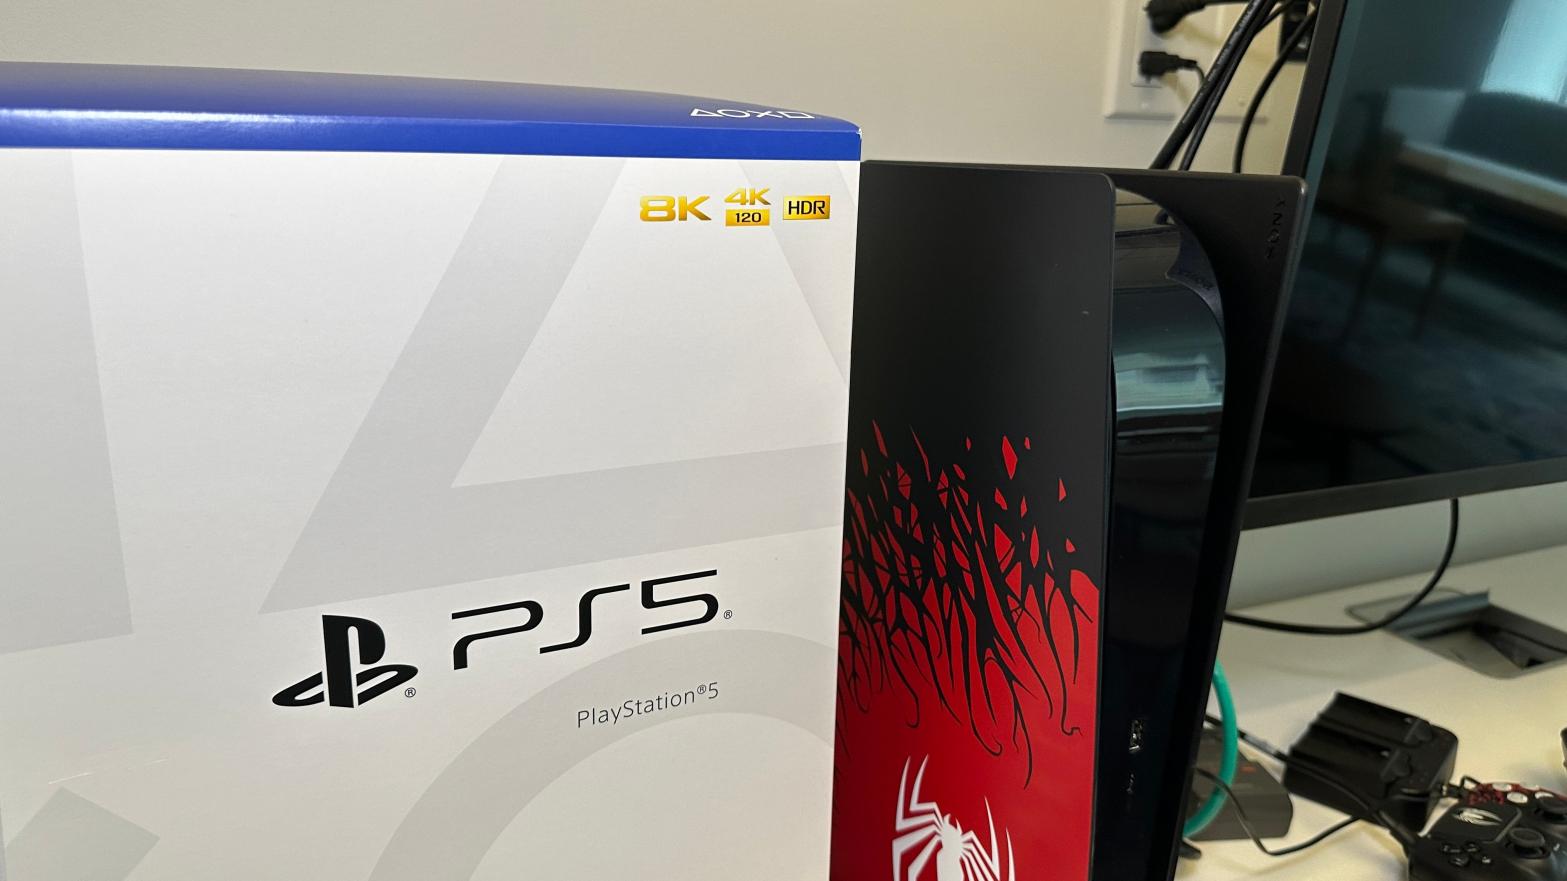 PlayStation 5 Was Never Going to Do 8K, and Now Sony Has Finally Acknowledged That